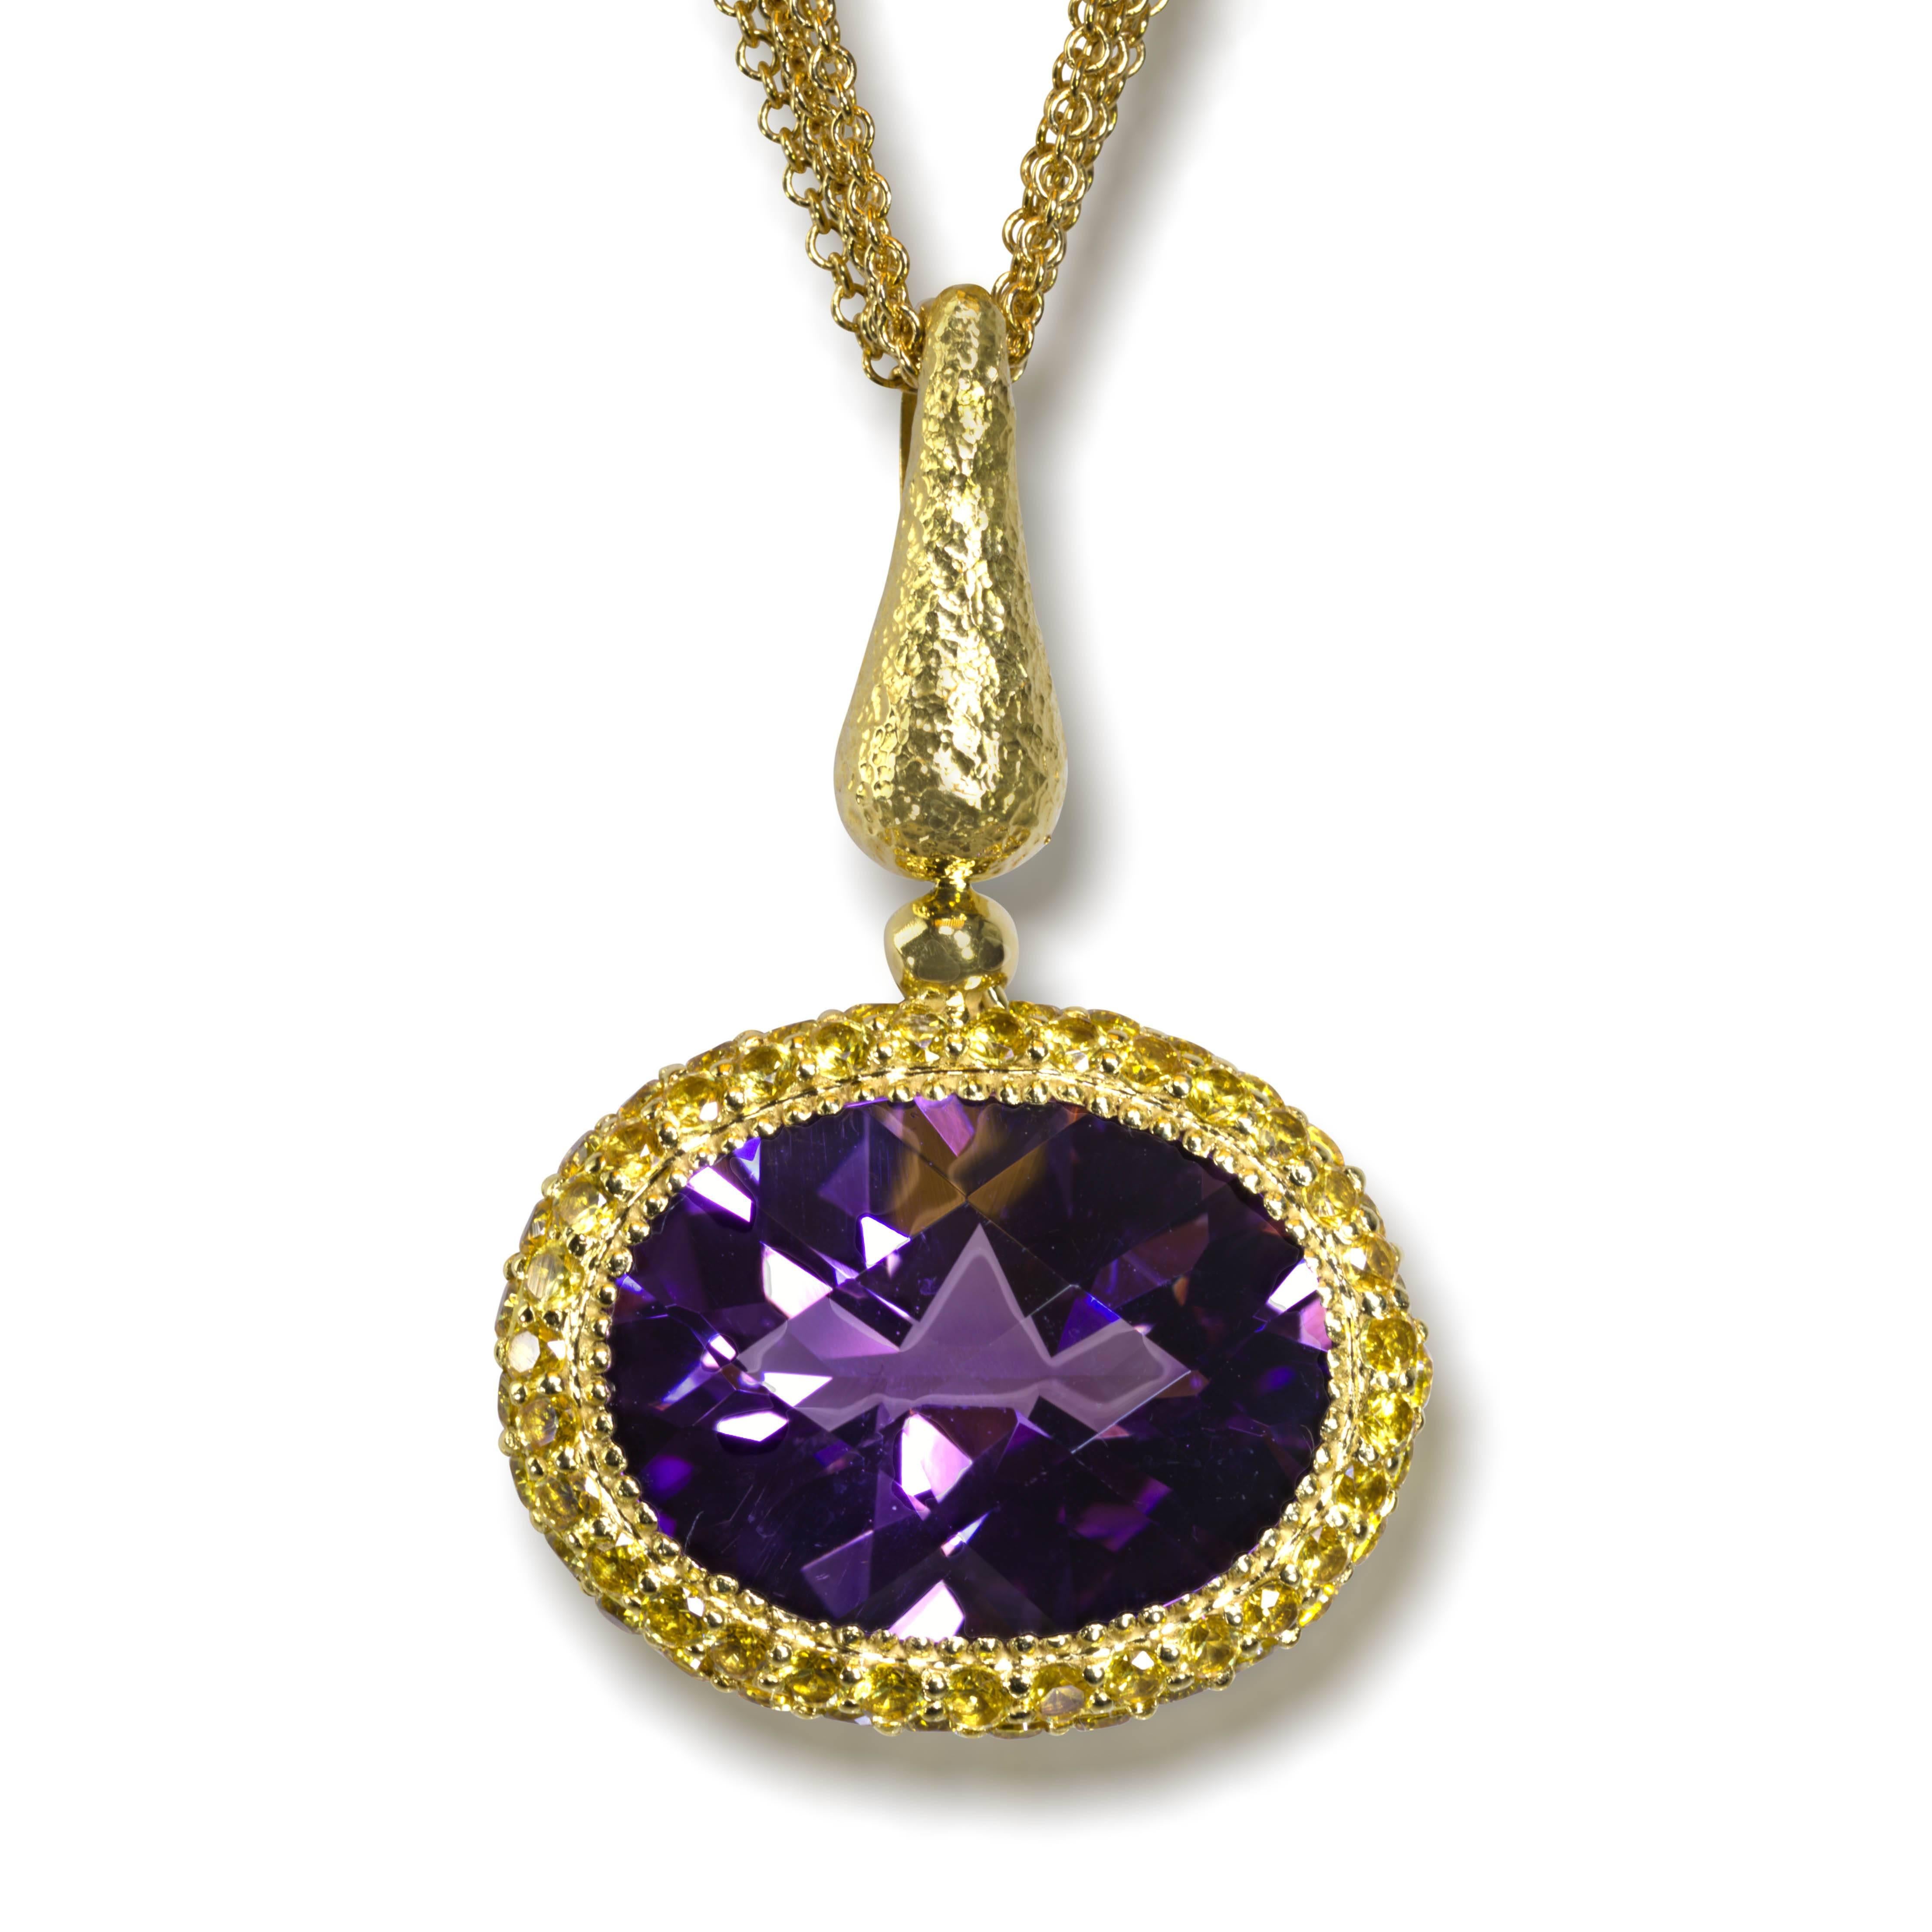 Alex Soldier's Cocktail Art Pendant is made in 18 karat yellow gold with 9 carats of amethyst and 2.2 carats of yellow sapphires. This gorgeous pendant features Alex Soldier's signature metalwork and includes 18 karat yellow gold multi-strand chain,